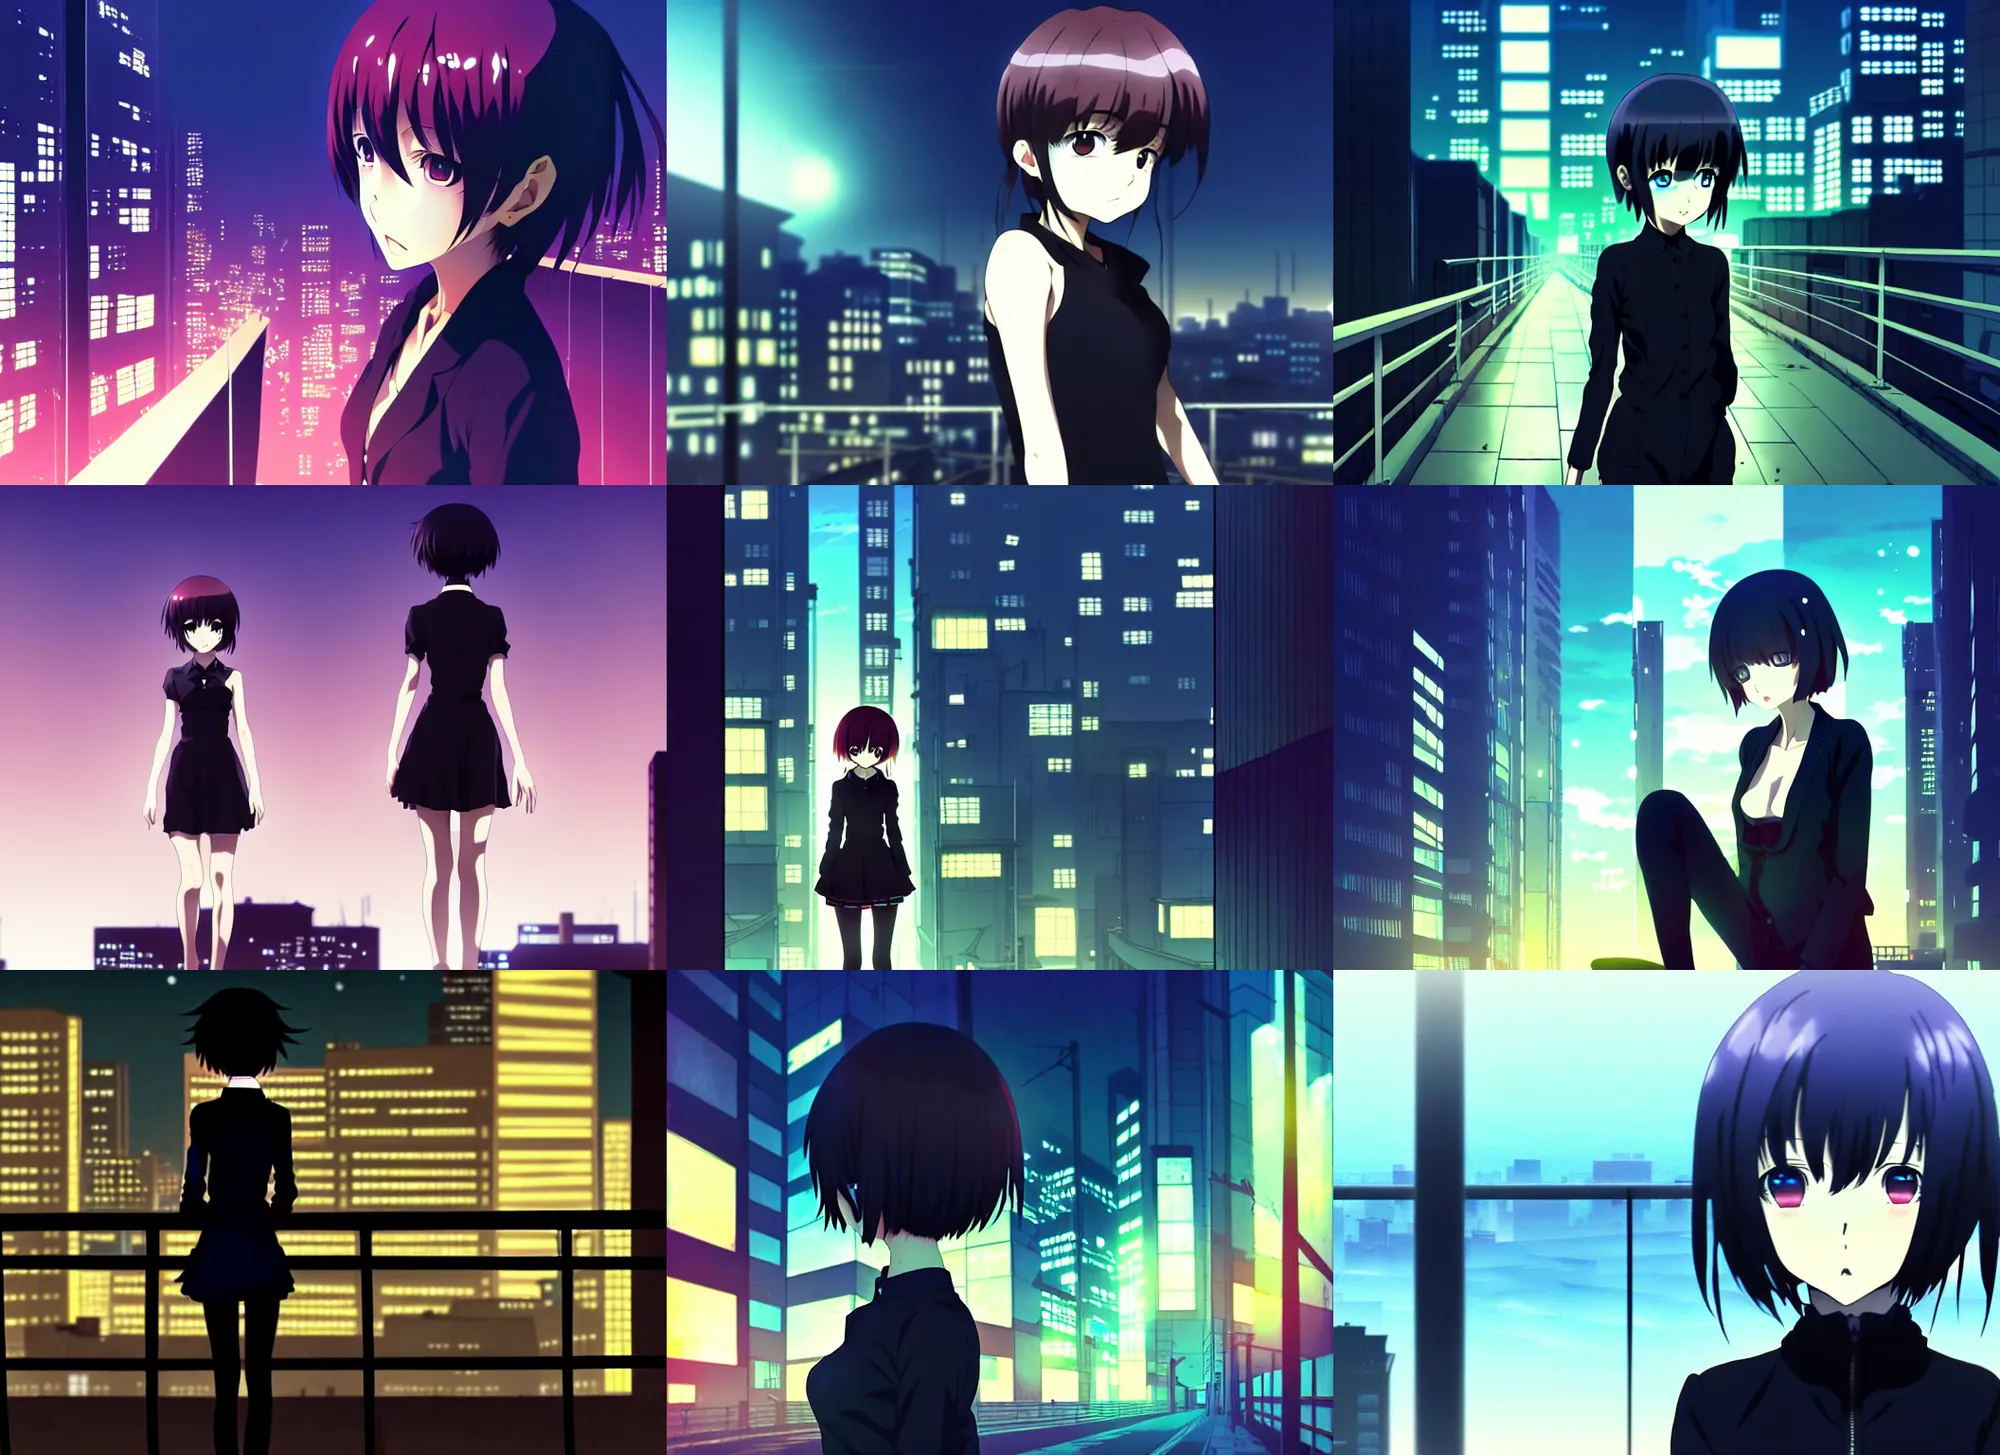 Prompt: anime frames, anime visual, dark portrait of a young female overlooking the city at night, guardrails, very low light, cute face by ilya kuvshinov and, psycho pass, kyoani, dynamic pose, dynamic perspective, strong silhouette, anime cels, rounded eyes, yoshinari yoh, dark tint